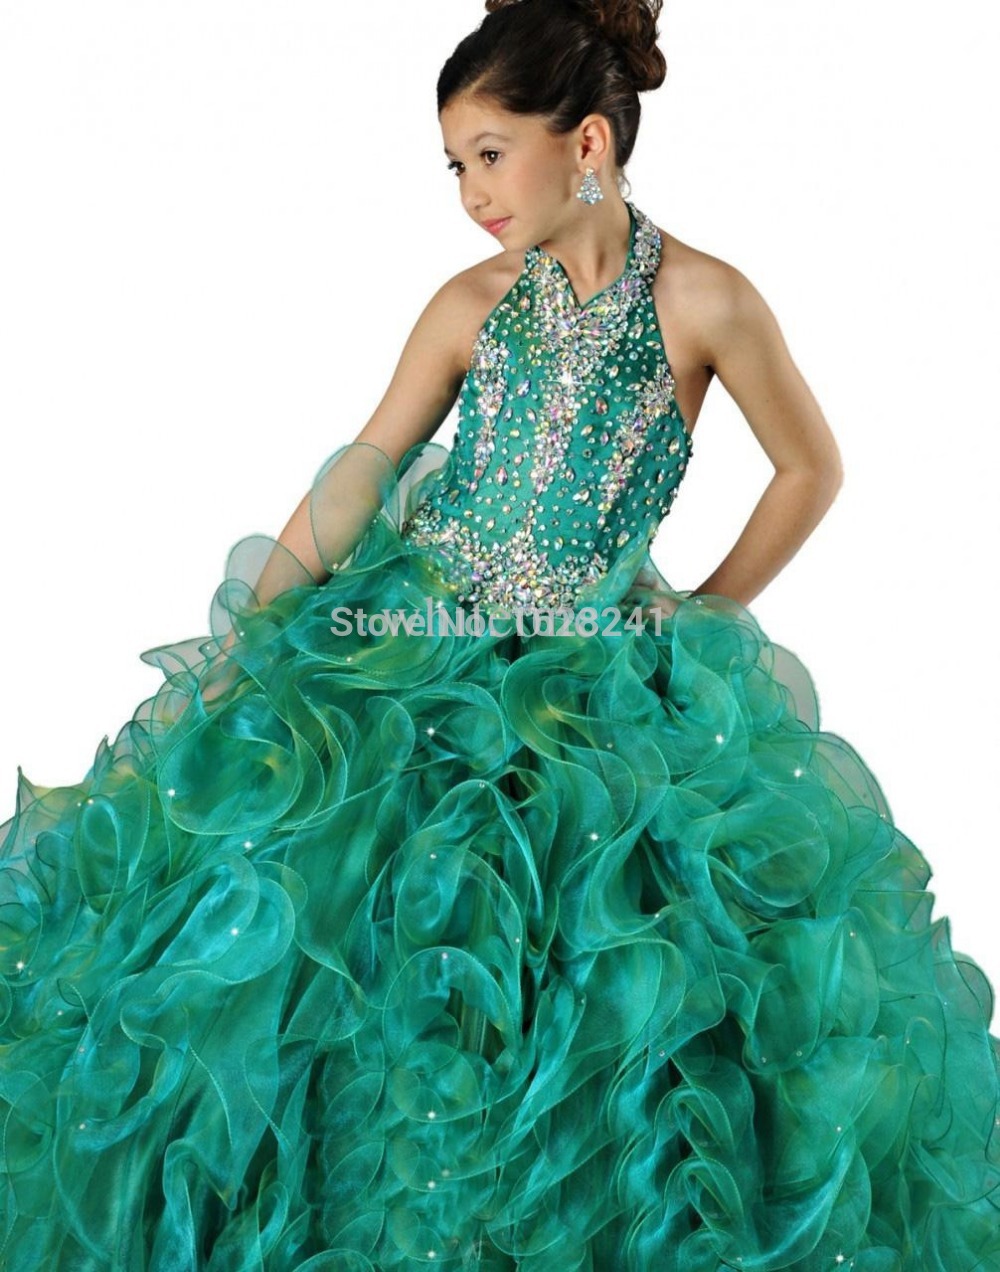 Pageant Dresses For Girls